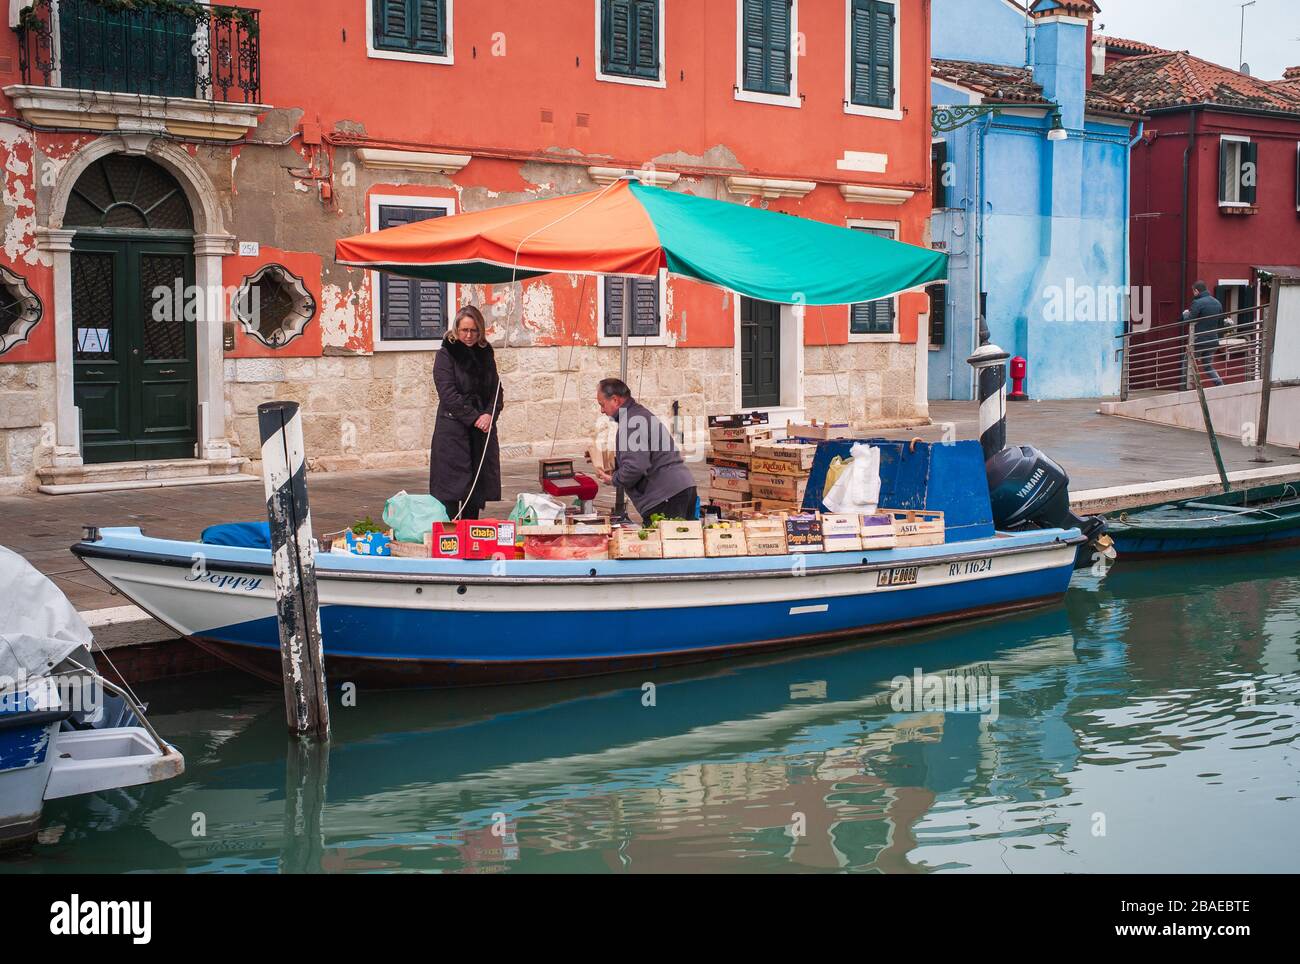 Burano, Venice, Italy - January 3 2014: Woman buying Groceries from a Boat in Venice. Groceries Boats are called Barge or Barca in Italian. Stock Photo